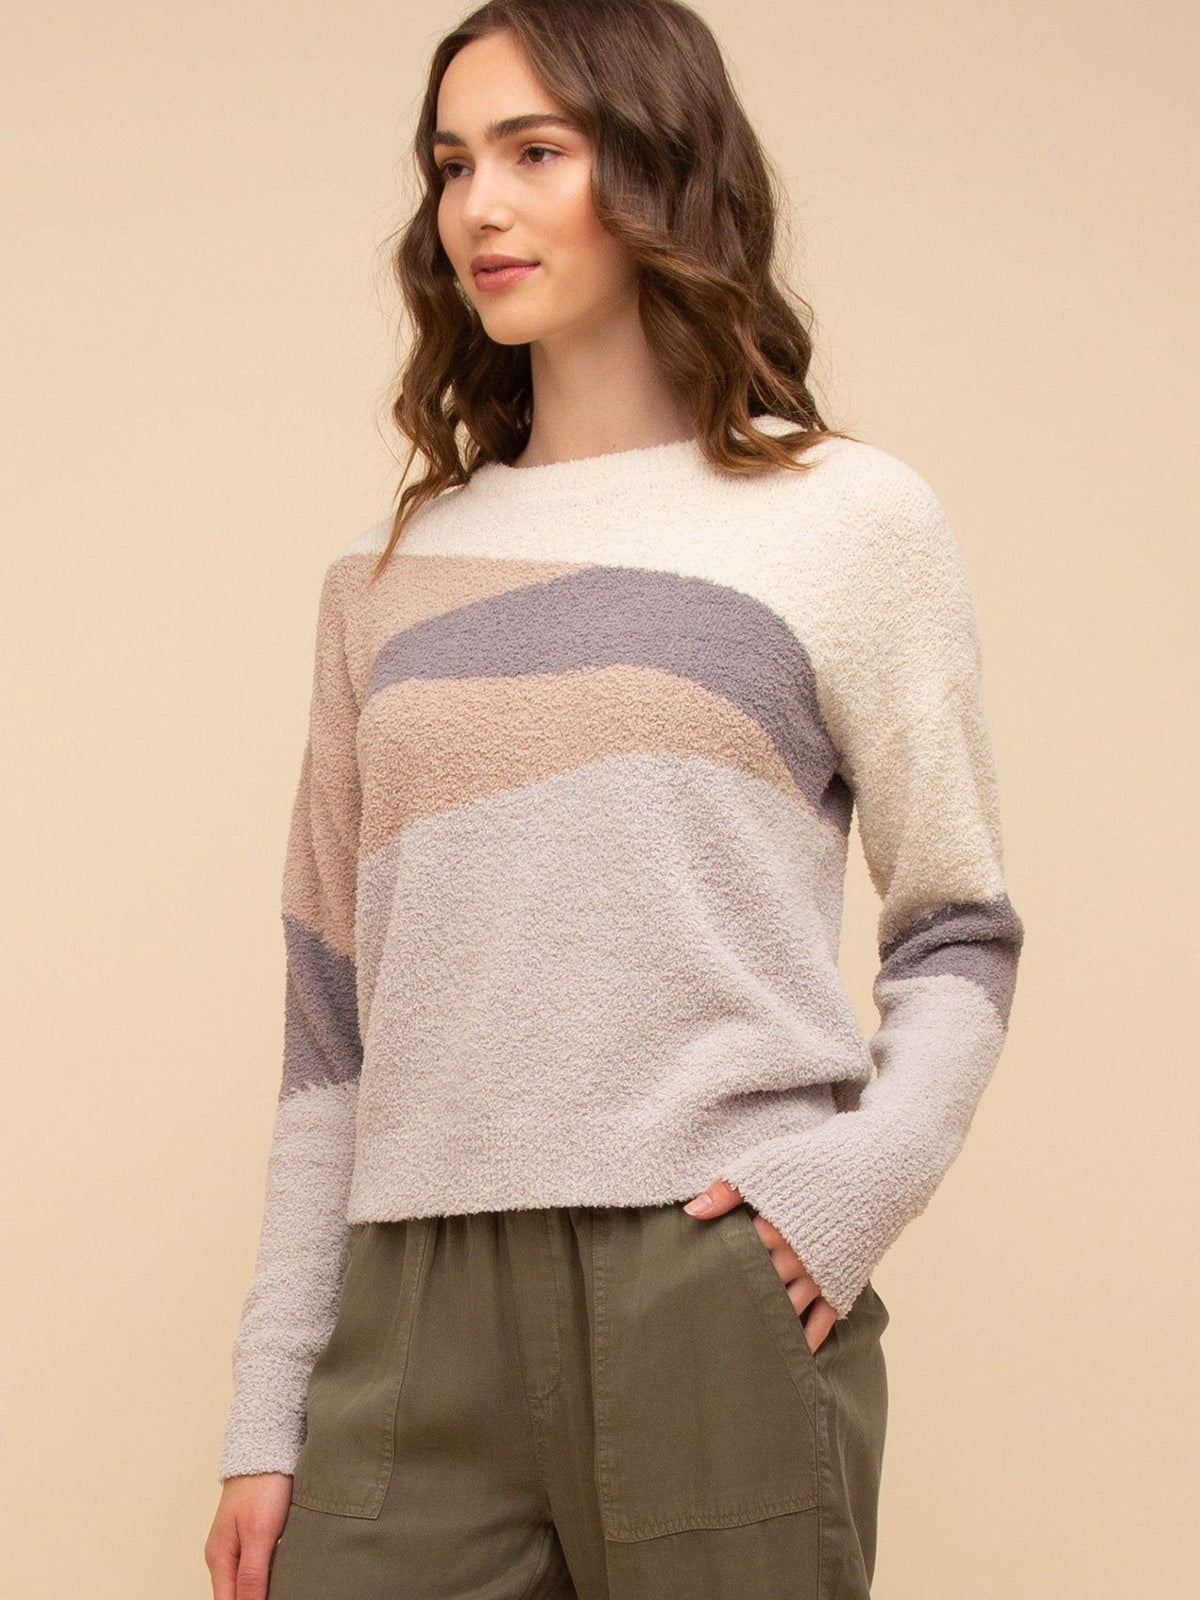 LAKESHORE SWEATER - PRE PACK 6 UNITS